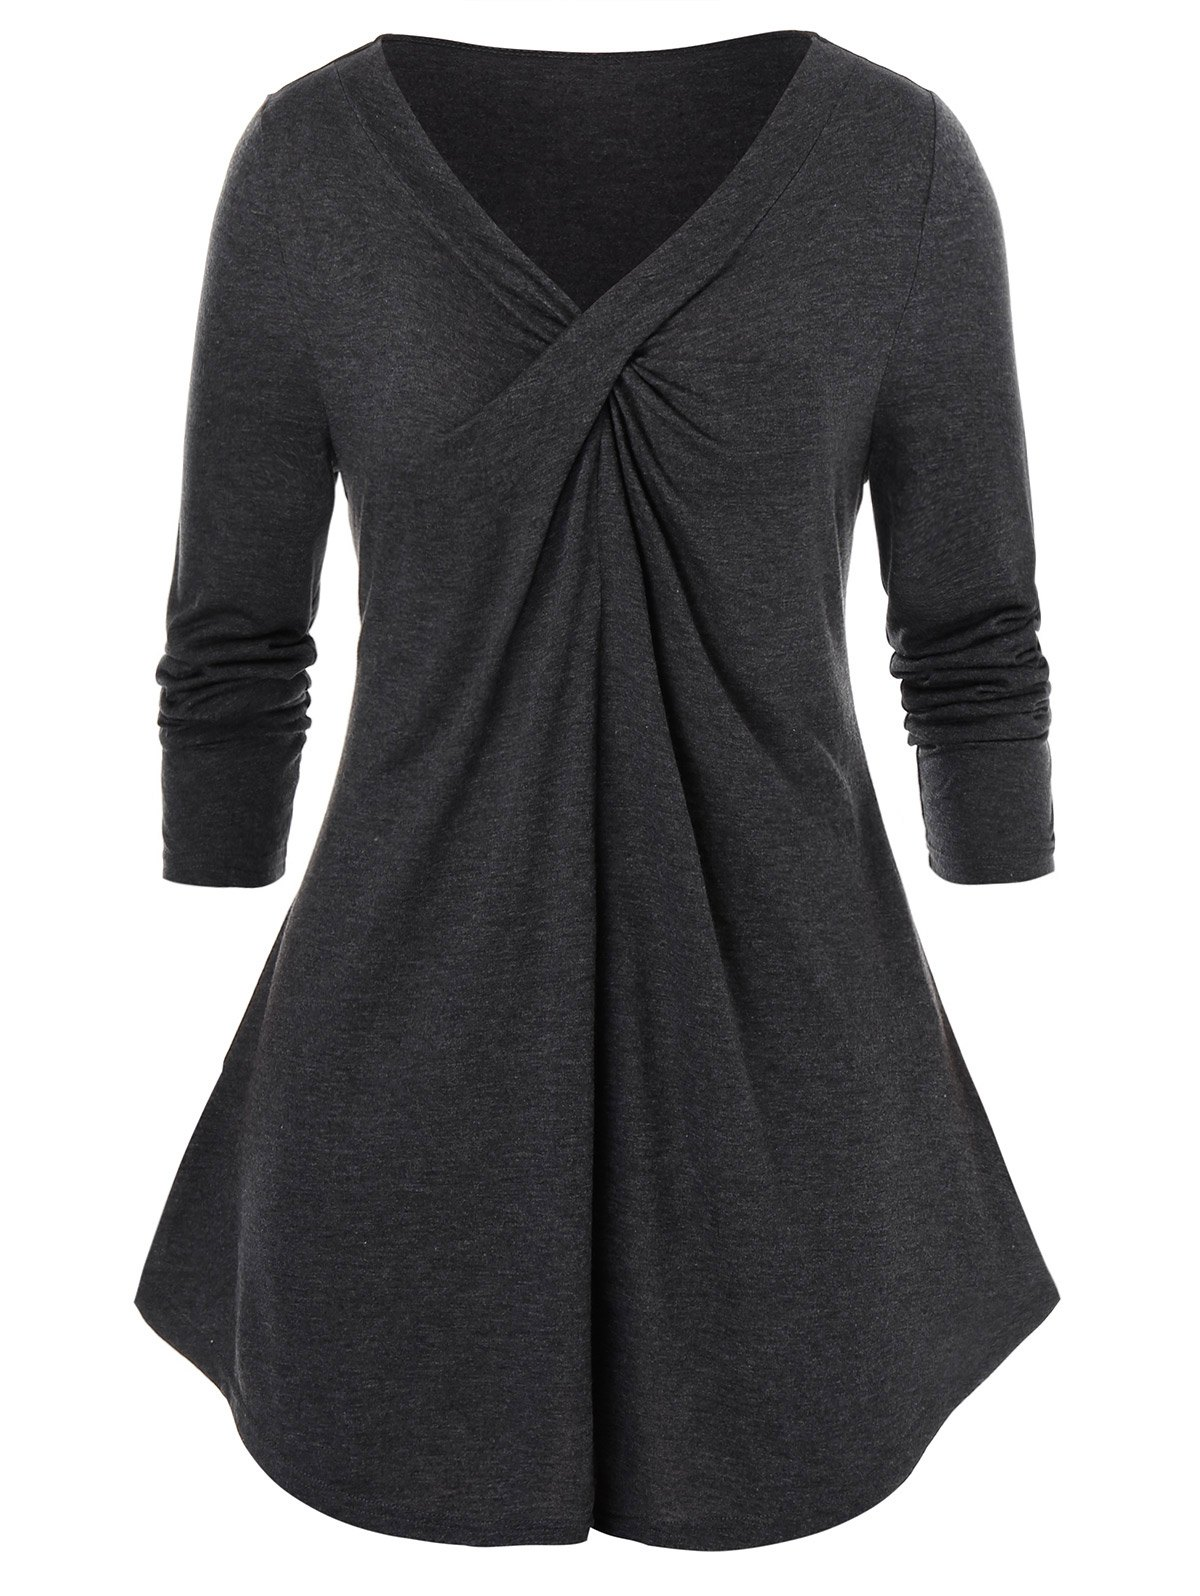 Long Sleeve Twist-front Plus Size Tunic Top - Big and Sexy Sportswear